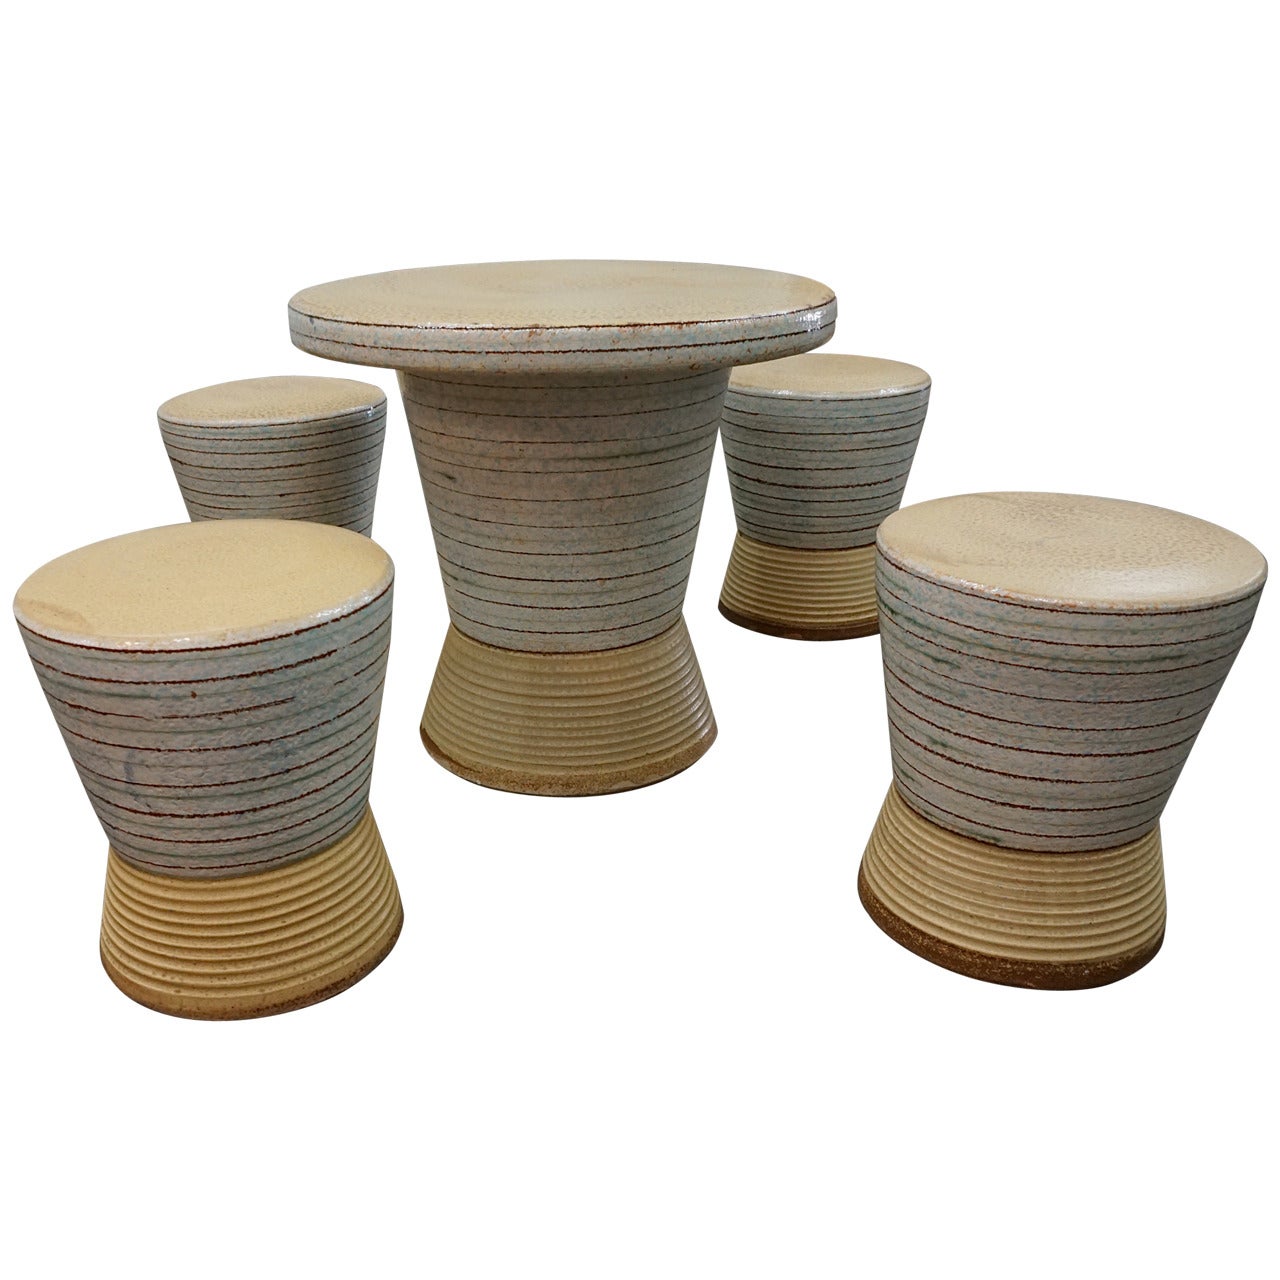 Exceptional Ceramic Table and Stools